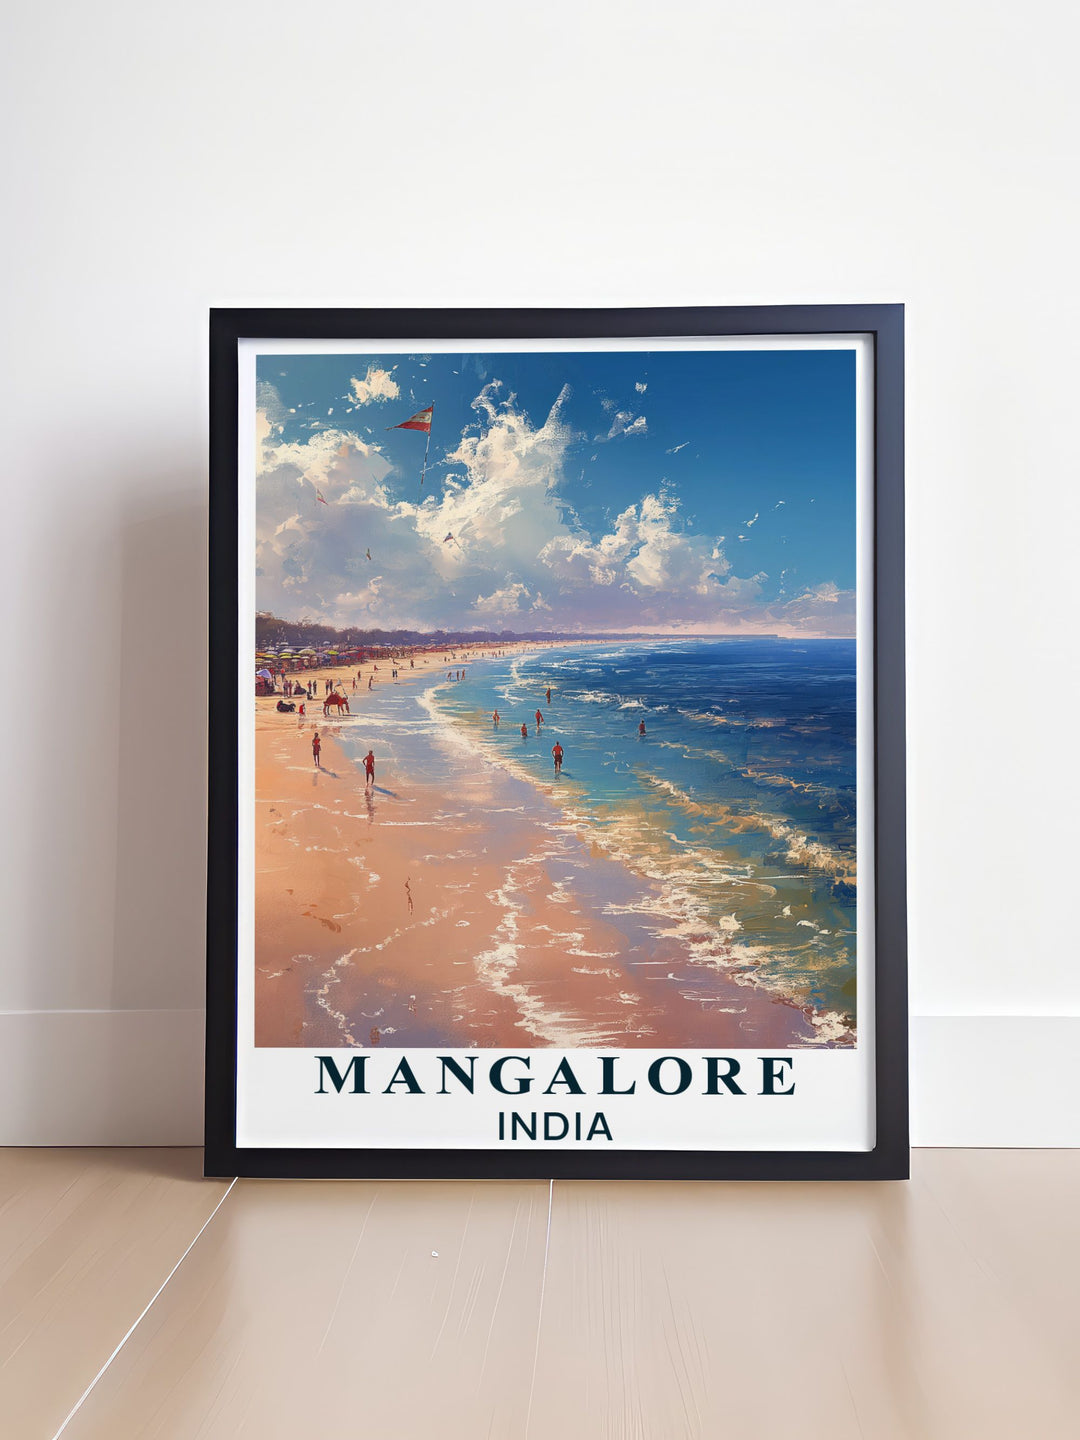 Featuring the scenic Panambur Beach in Mangalore, this poster highlights the golden sands and gentle waves, making it an ideal piece for those who love coastal landscapes and the vibrant culture of Karnataka.